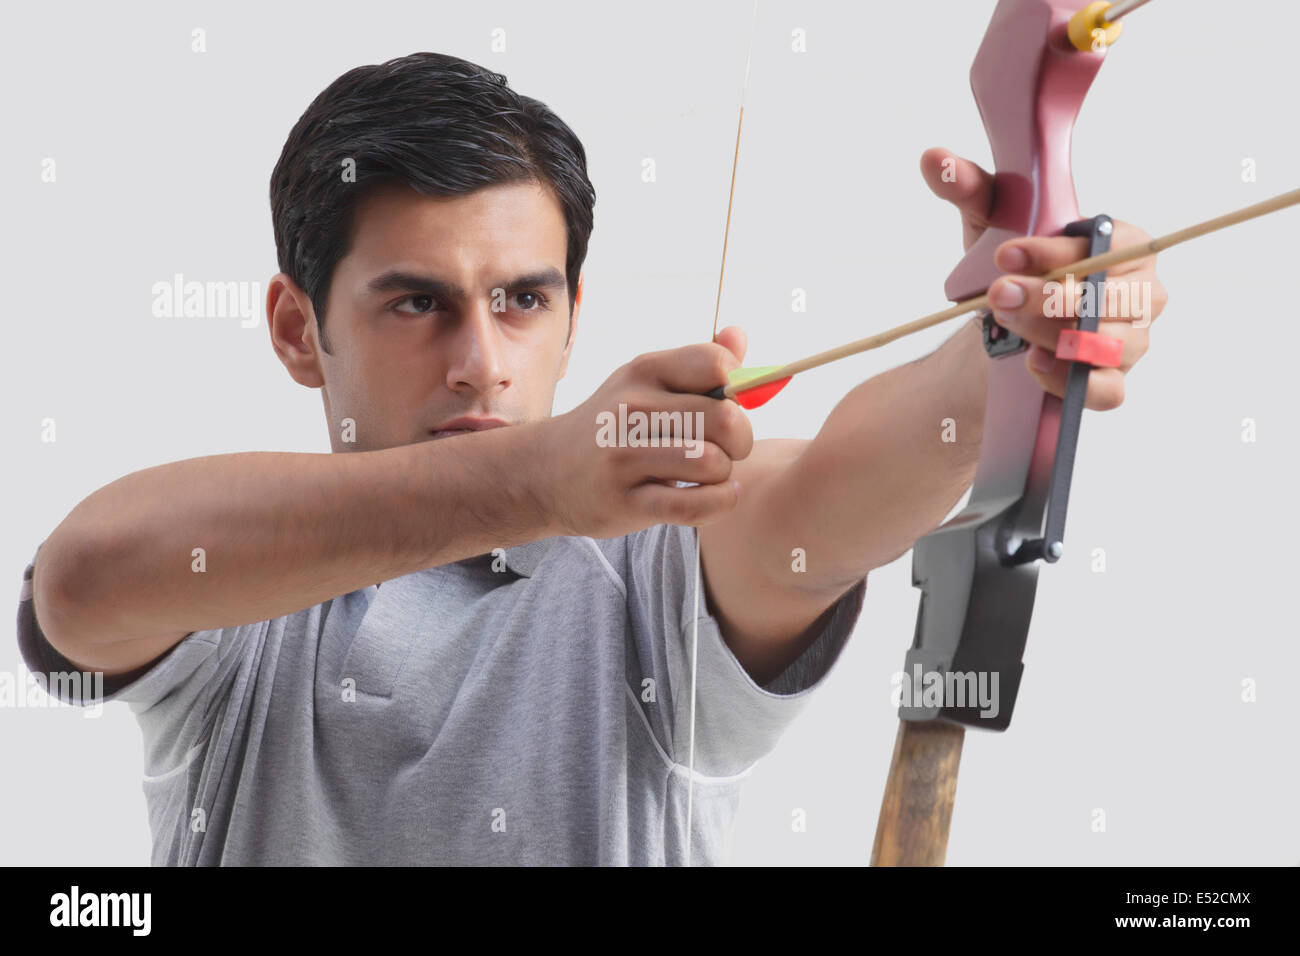 Male archer taking aim with competition bow against gray background Stock Photo